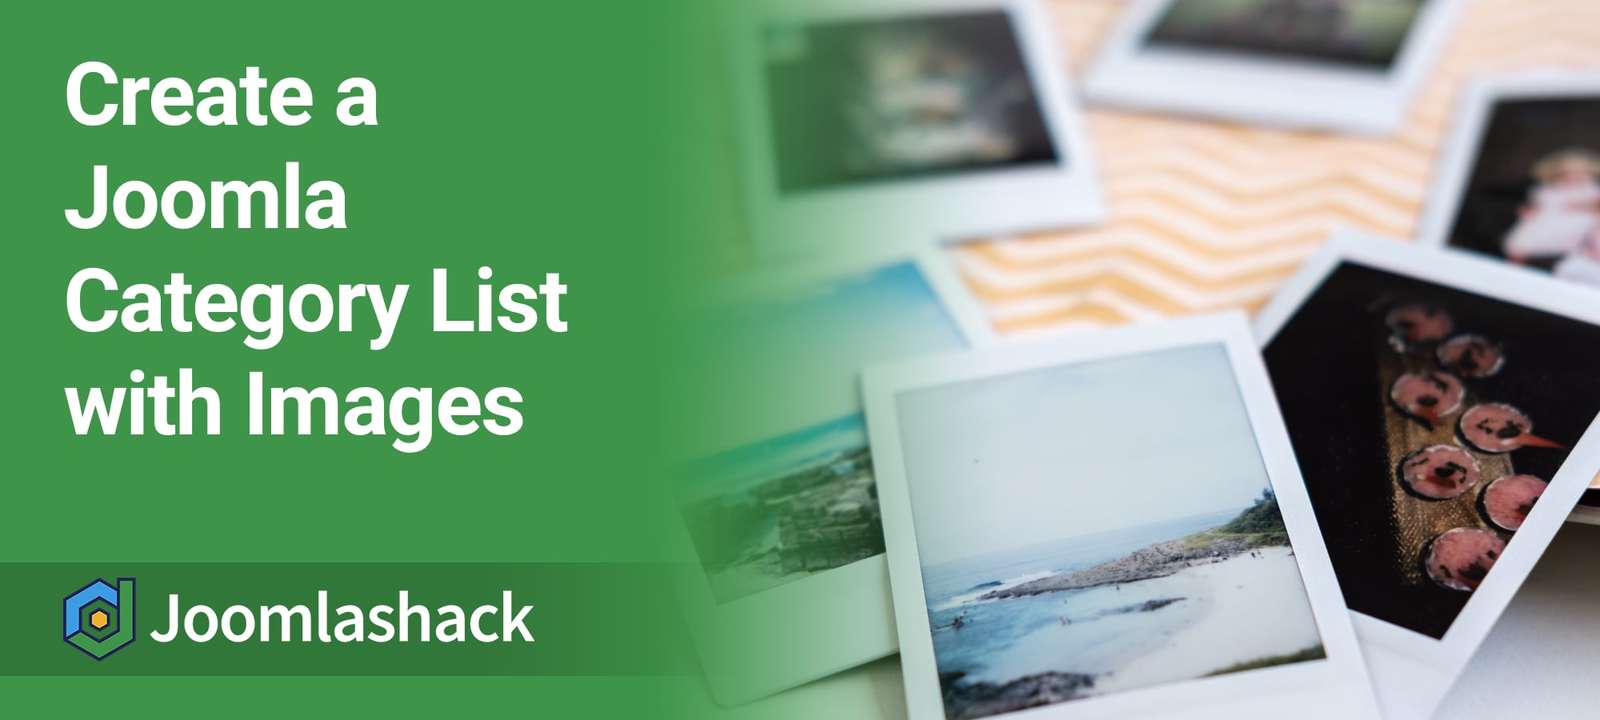 Create a Joomla Category List with Images